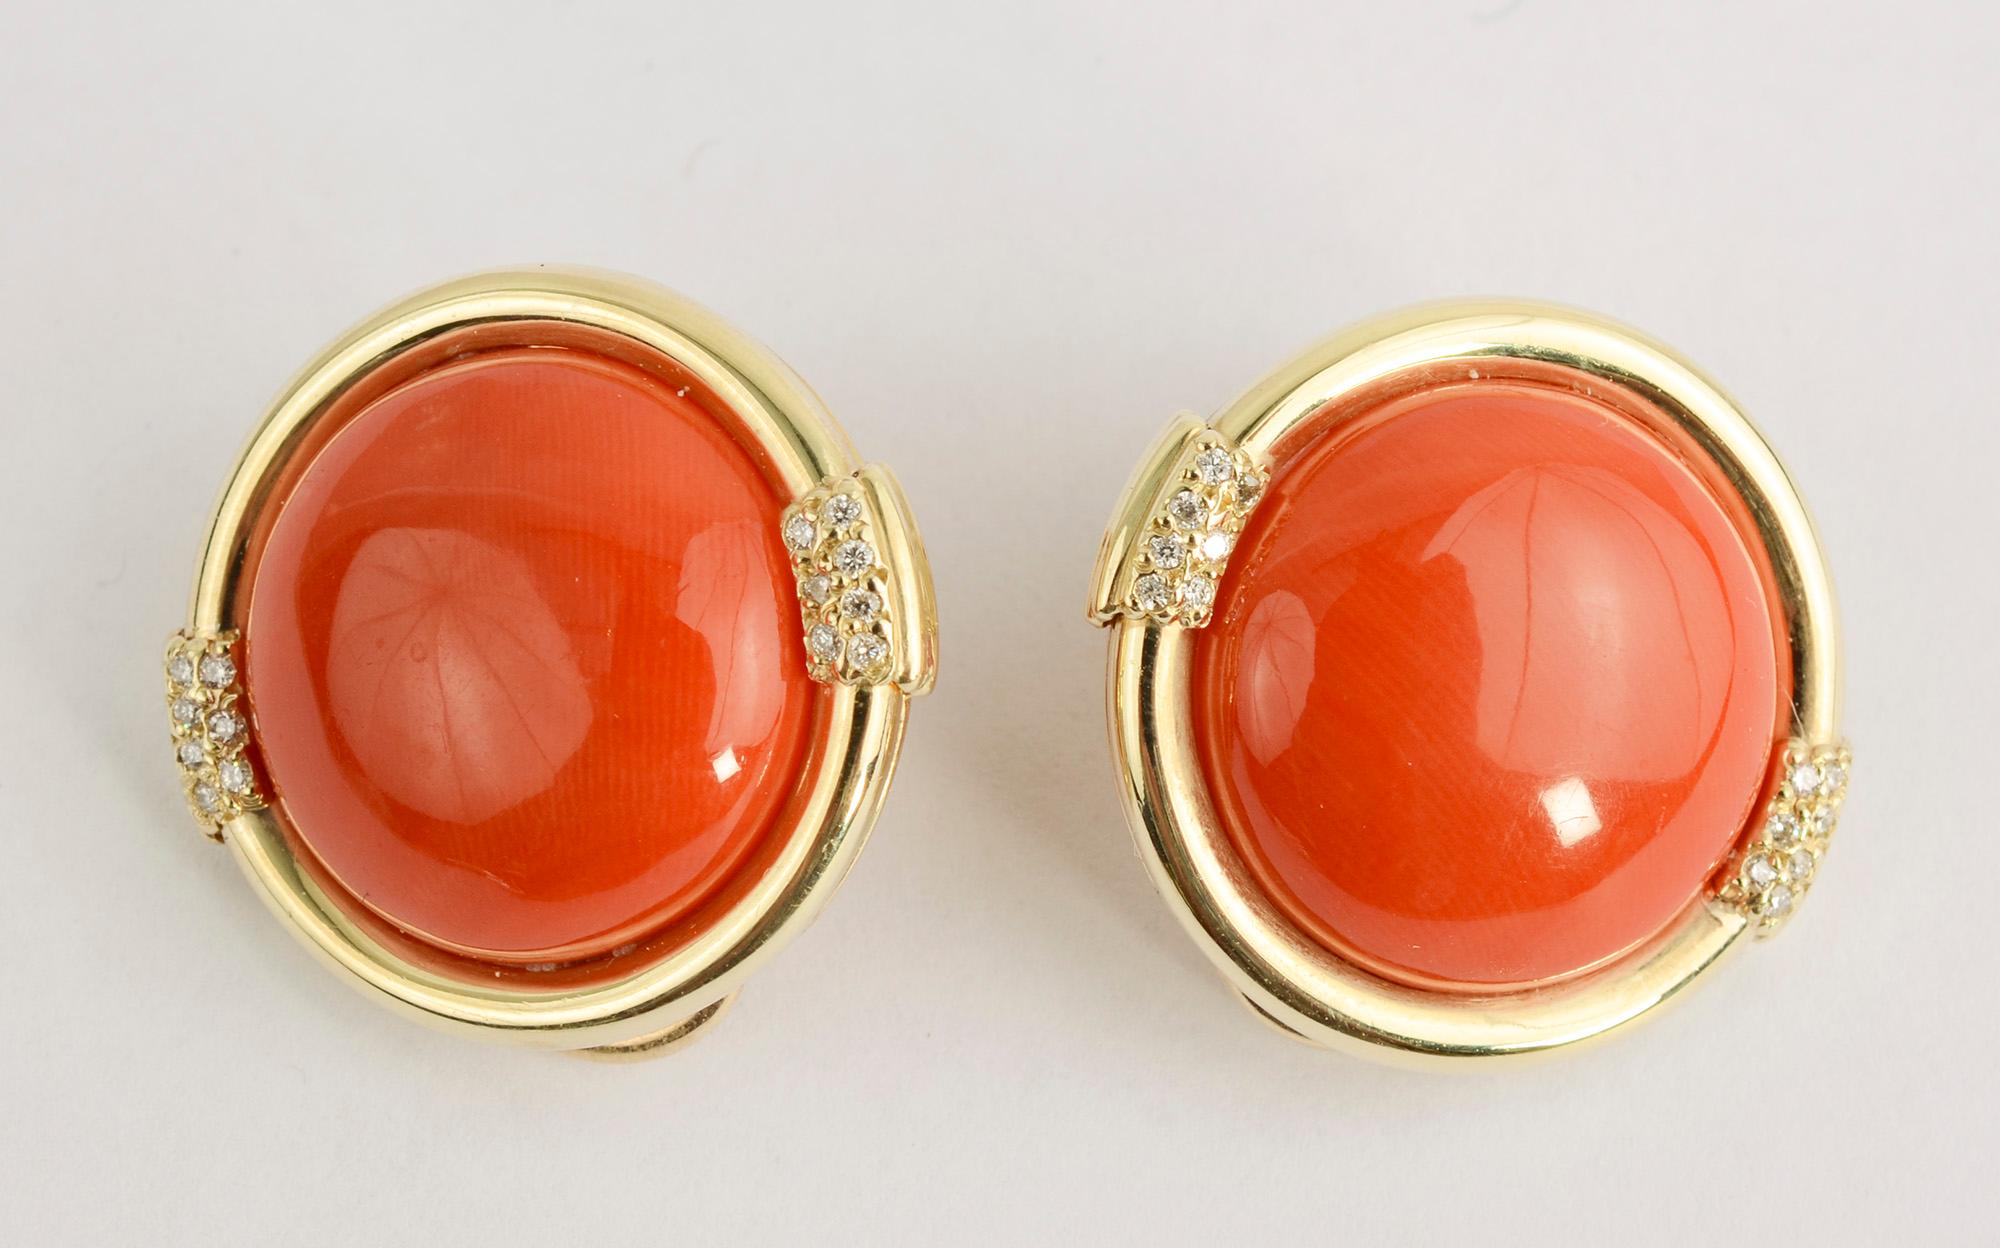 Beautifully colored coral earrings highlighted with three diamonds on either side for just a touch of bling. The earrings measure 1 inch in diameter. They appear to be signed Rio. Clip backs can be converted to posts.